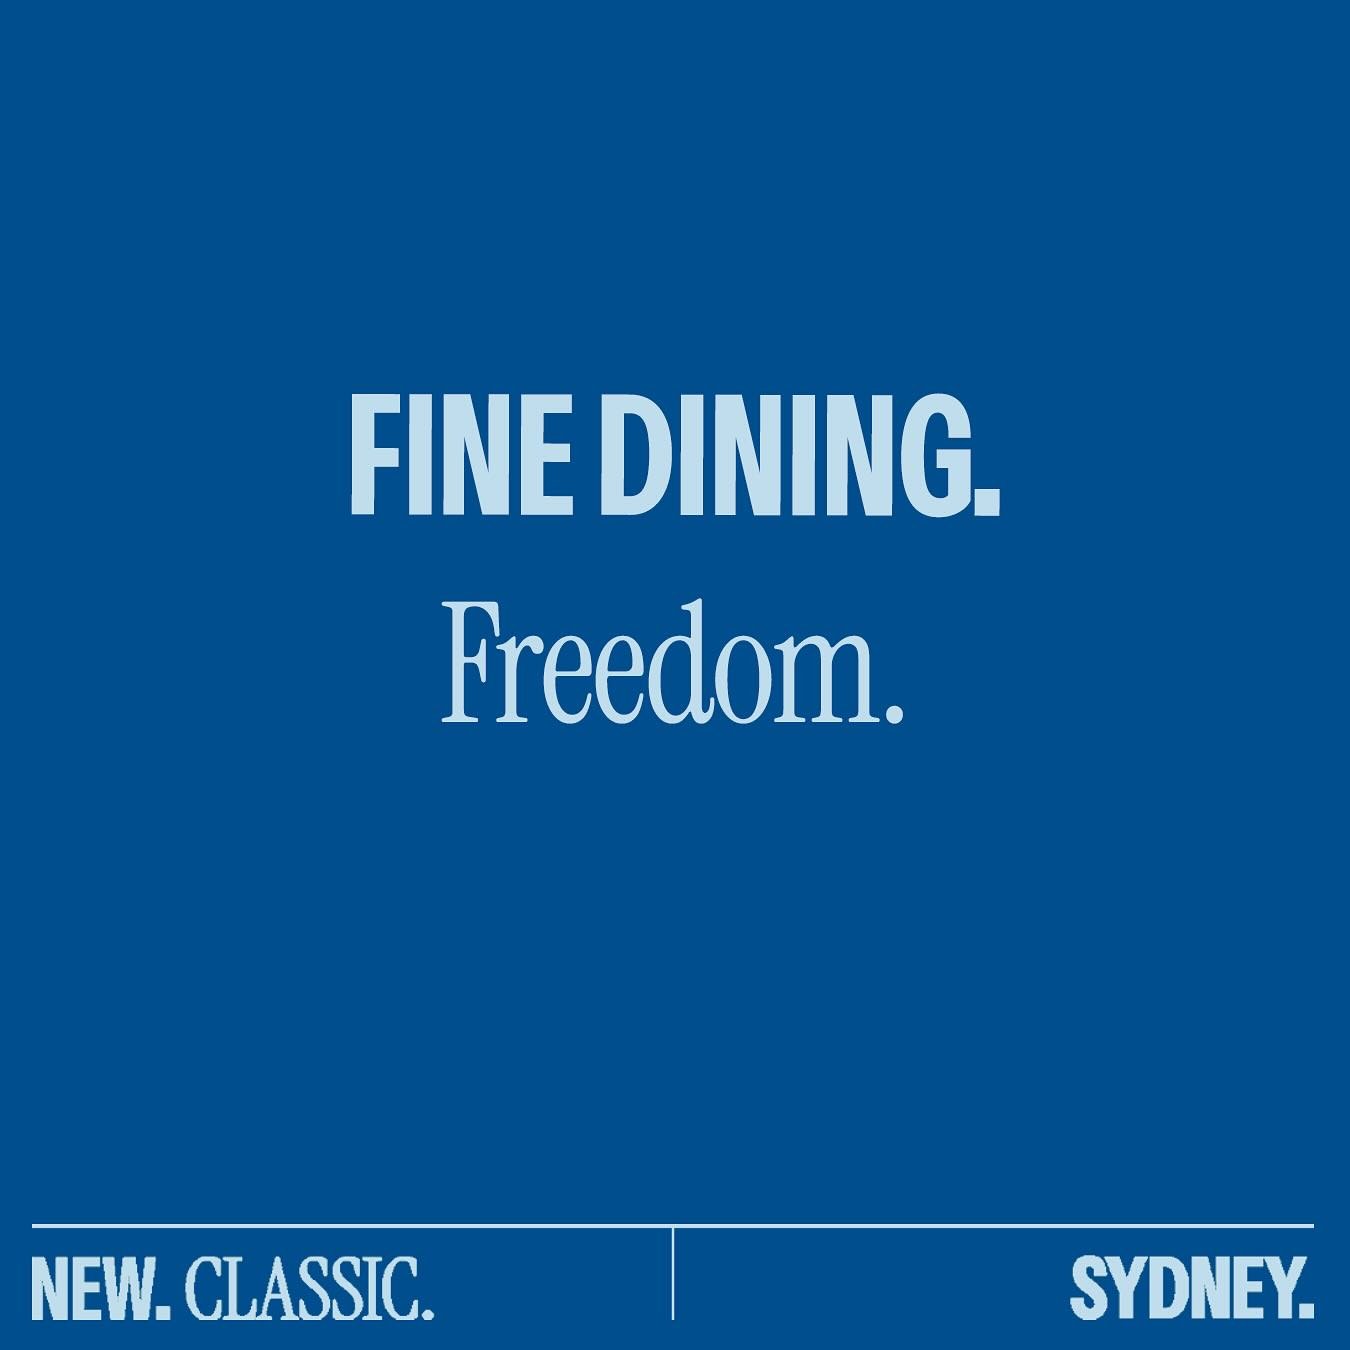 FINE DINING &amp; FREEDOM: Bringing new and classic back together